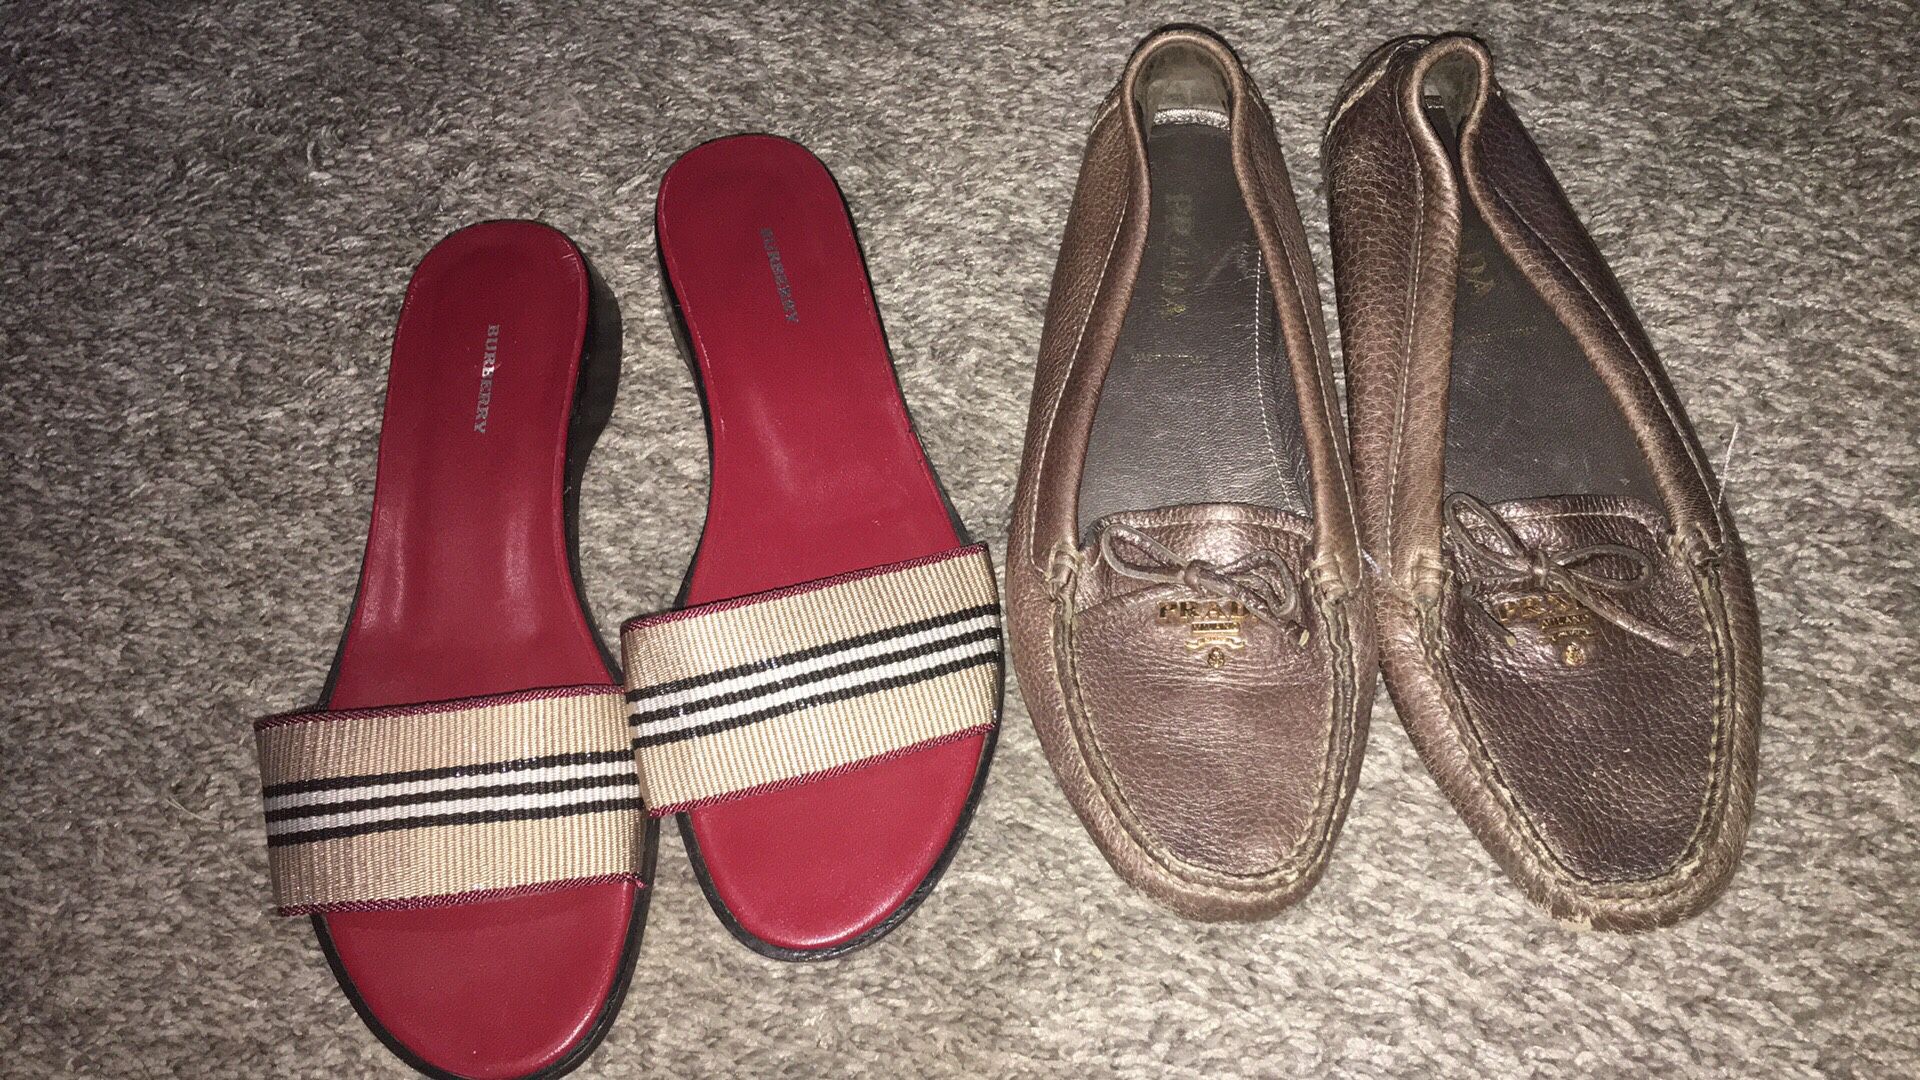 Authentic Prada and Burberry shoes size 7.5